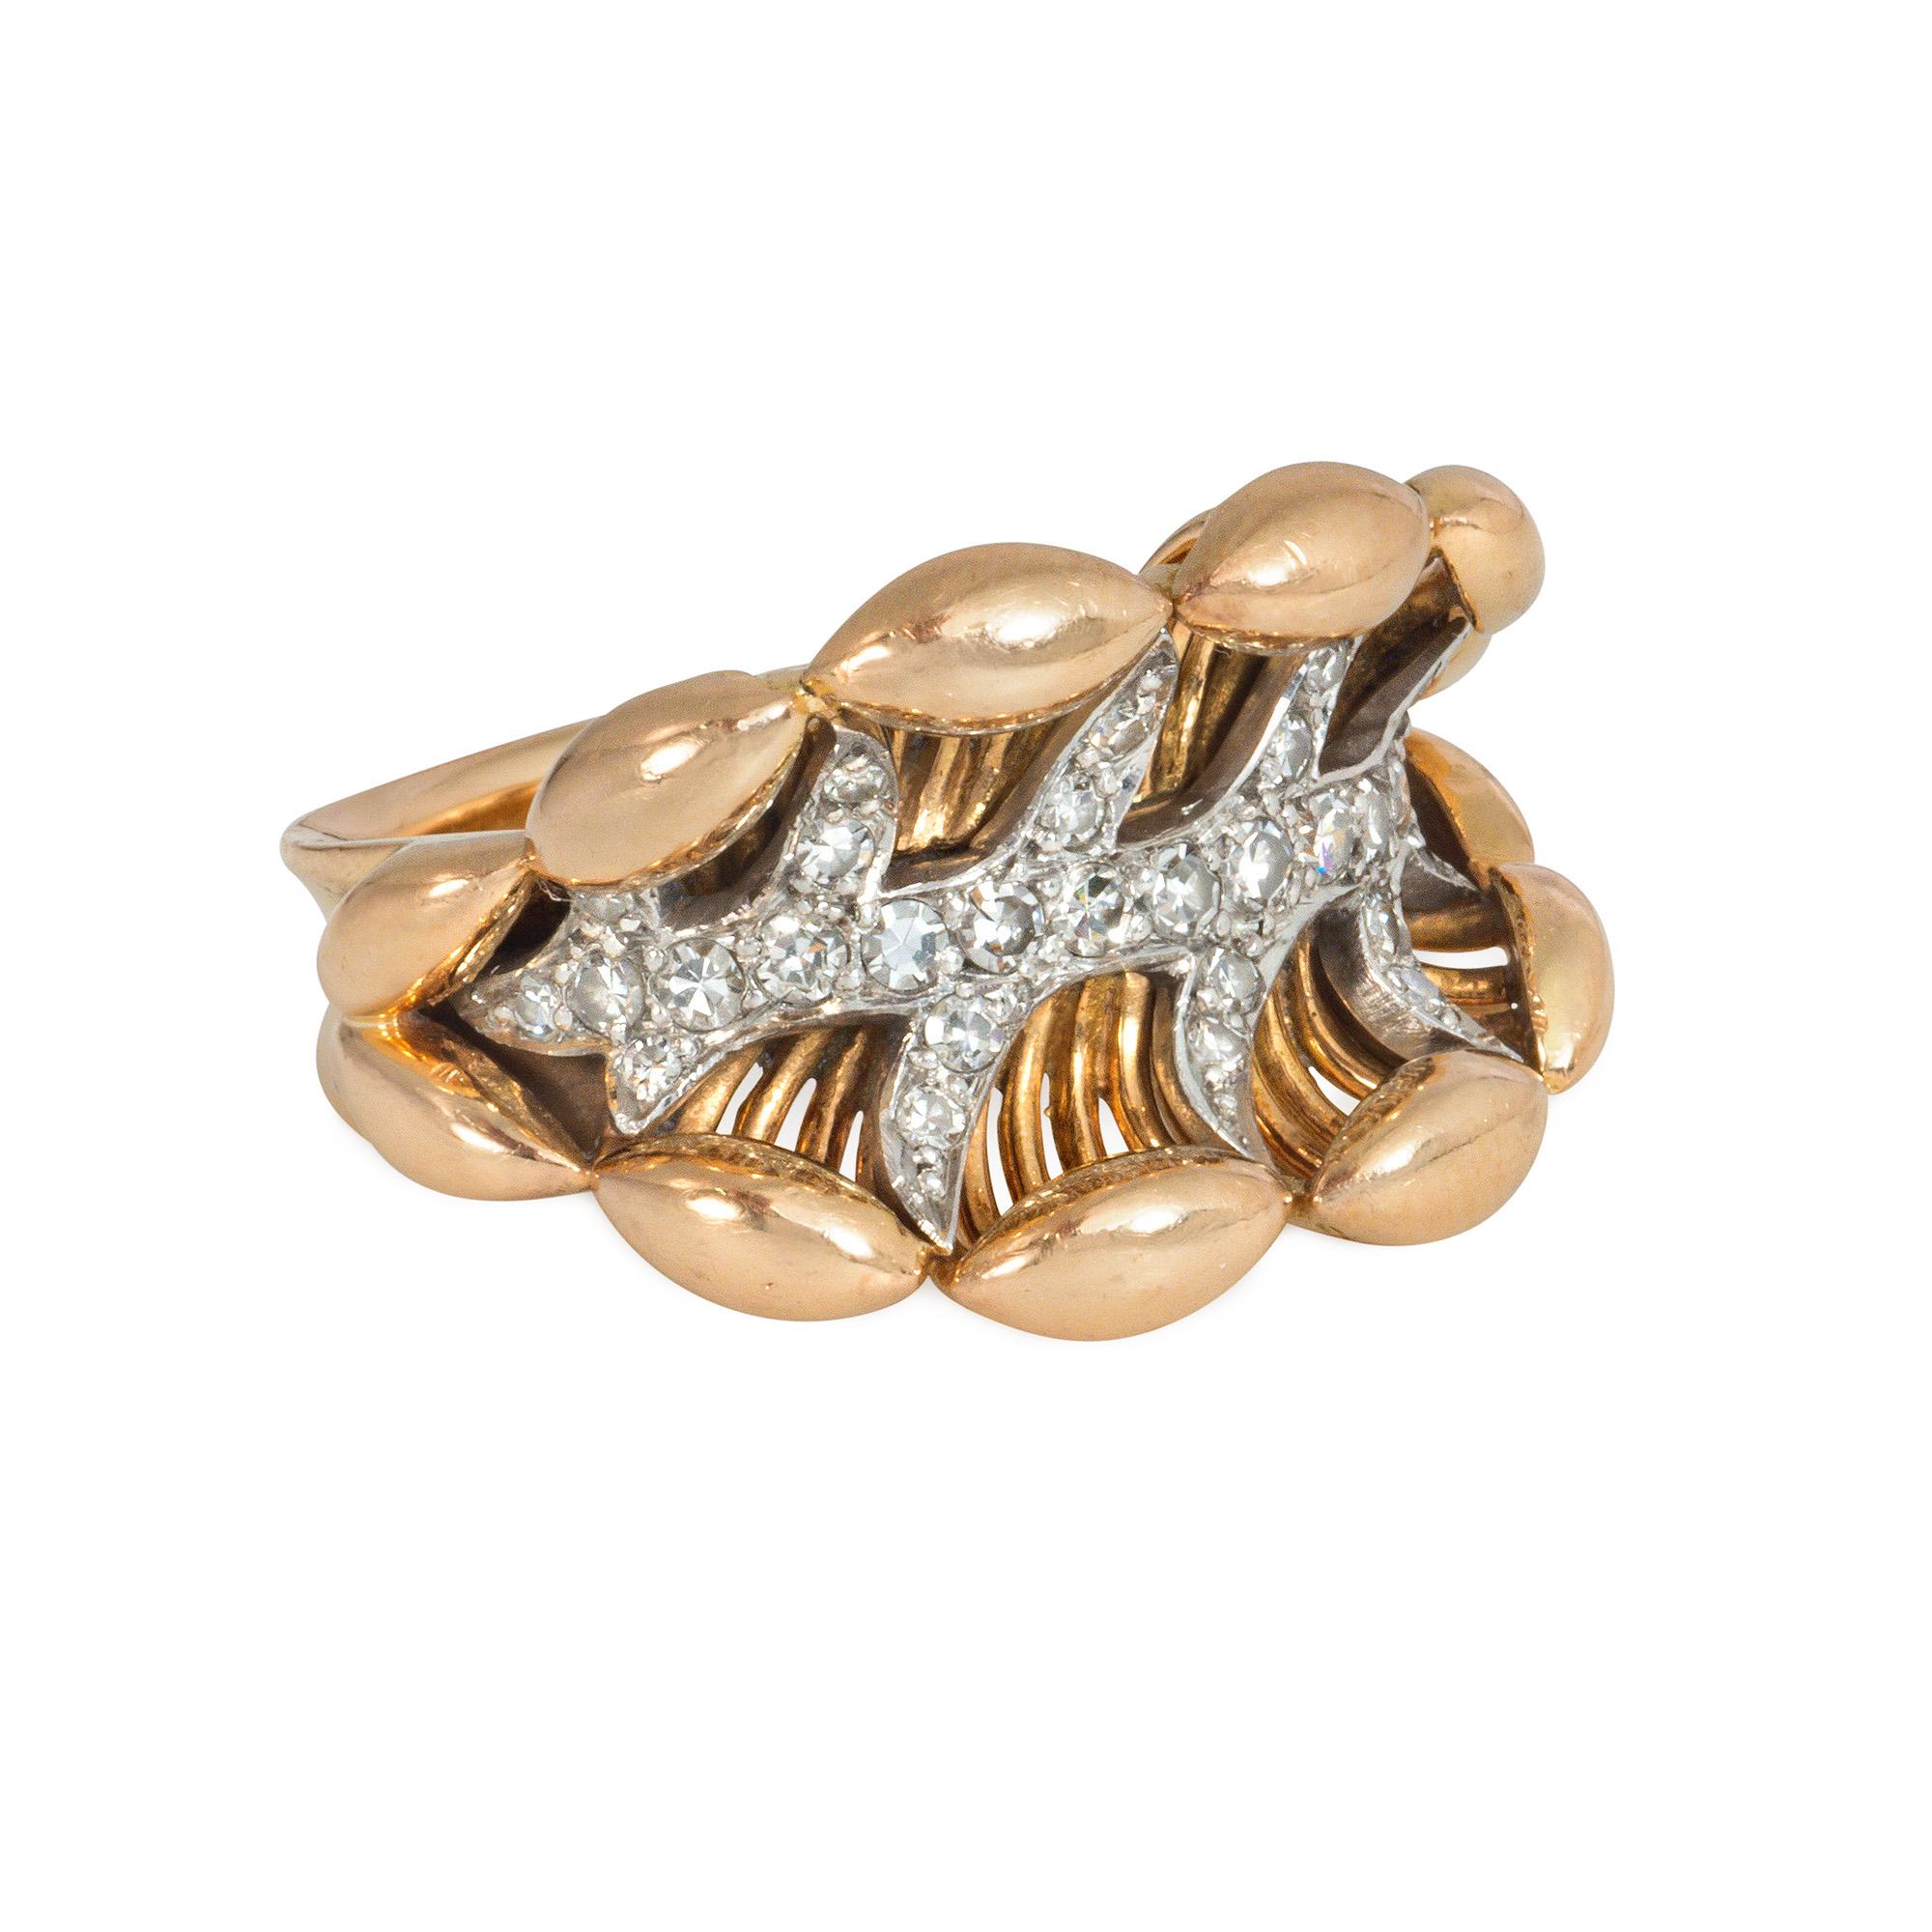 A Retro rose gold ring designed as a stylized horizontal leaf with diamond veining, in 18k. Maker's poinçon for Rene Fréchou.  Atw 0.34 ct.

R. Fréchou crafted jewels for prestigious houses such as Van Cleef & Arpels and Cartier